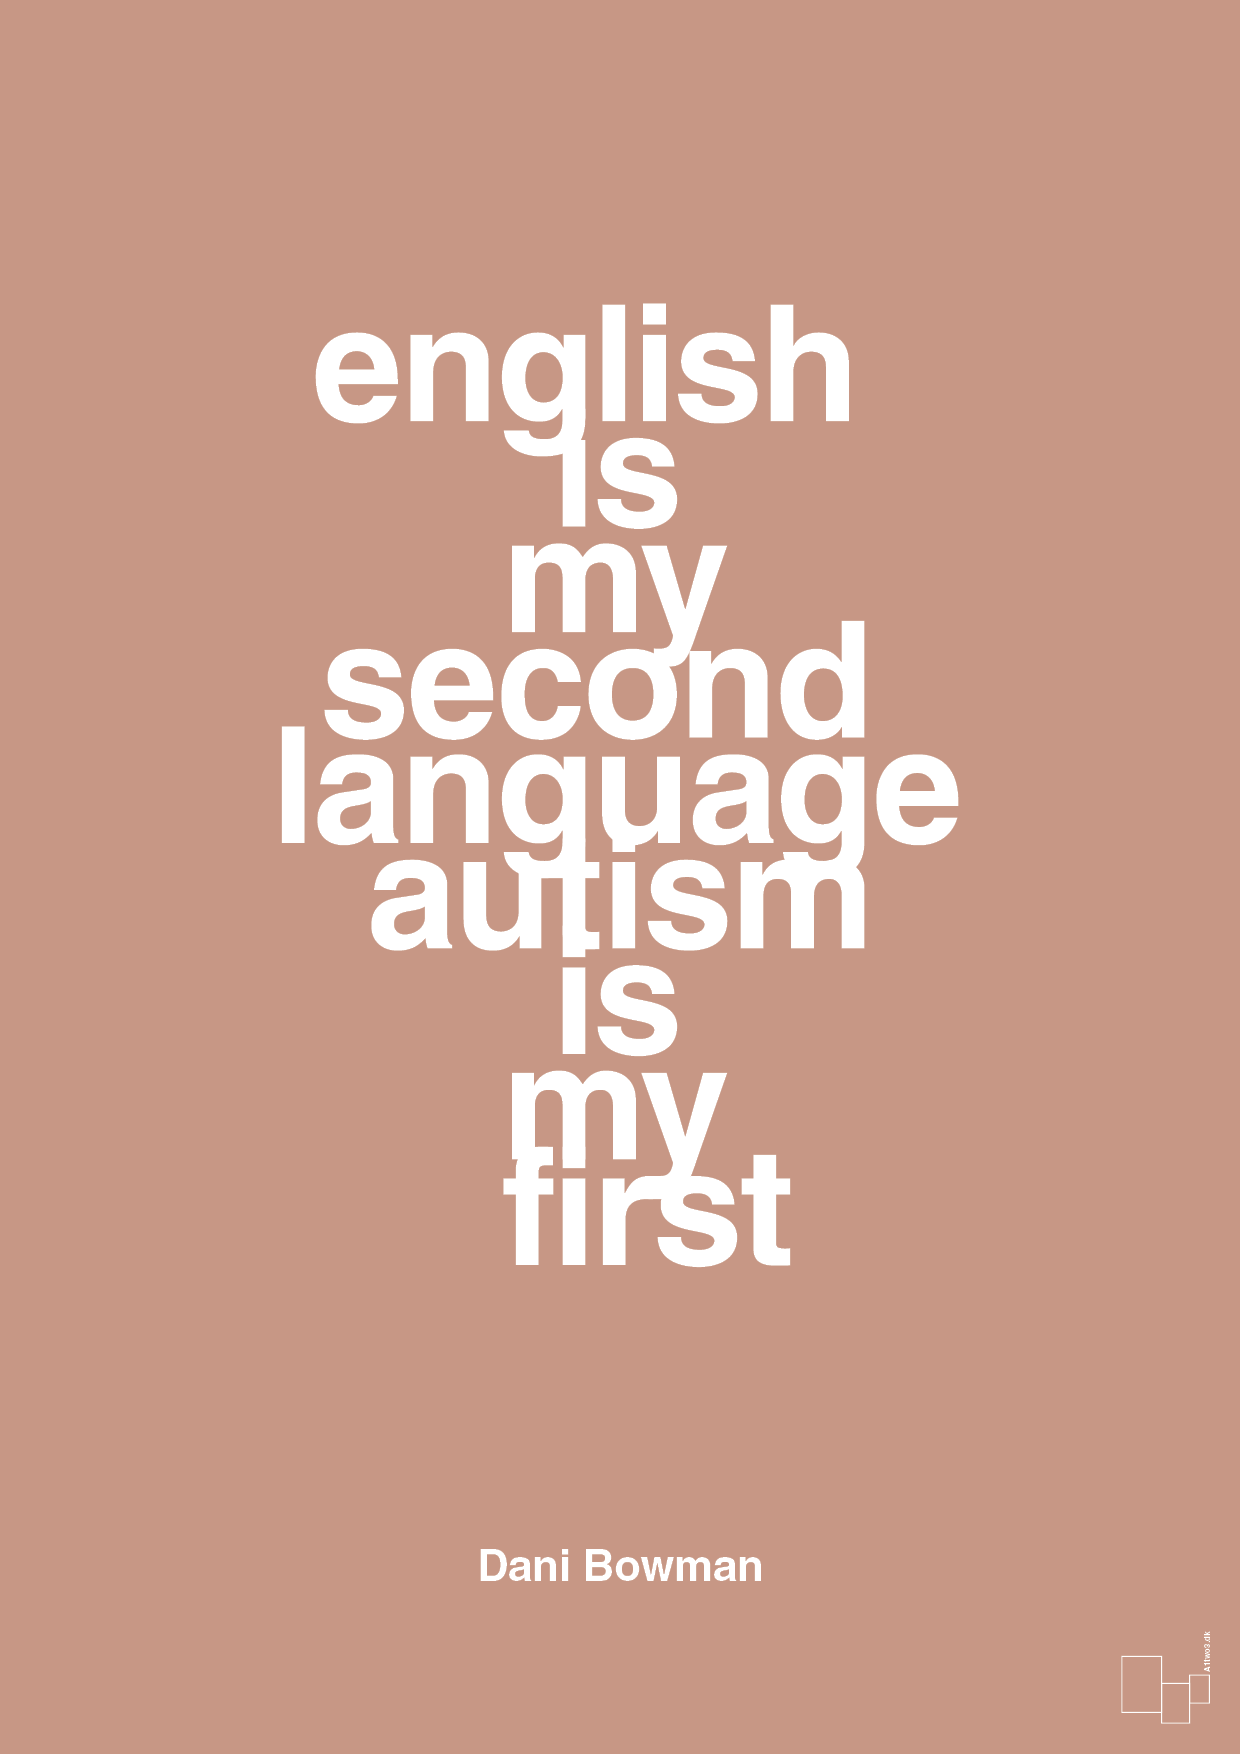 english is my second language autism is my first - Plakat med Samfund i Powder